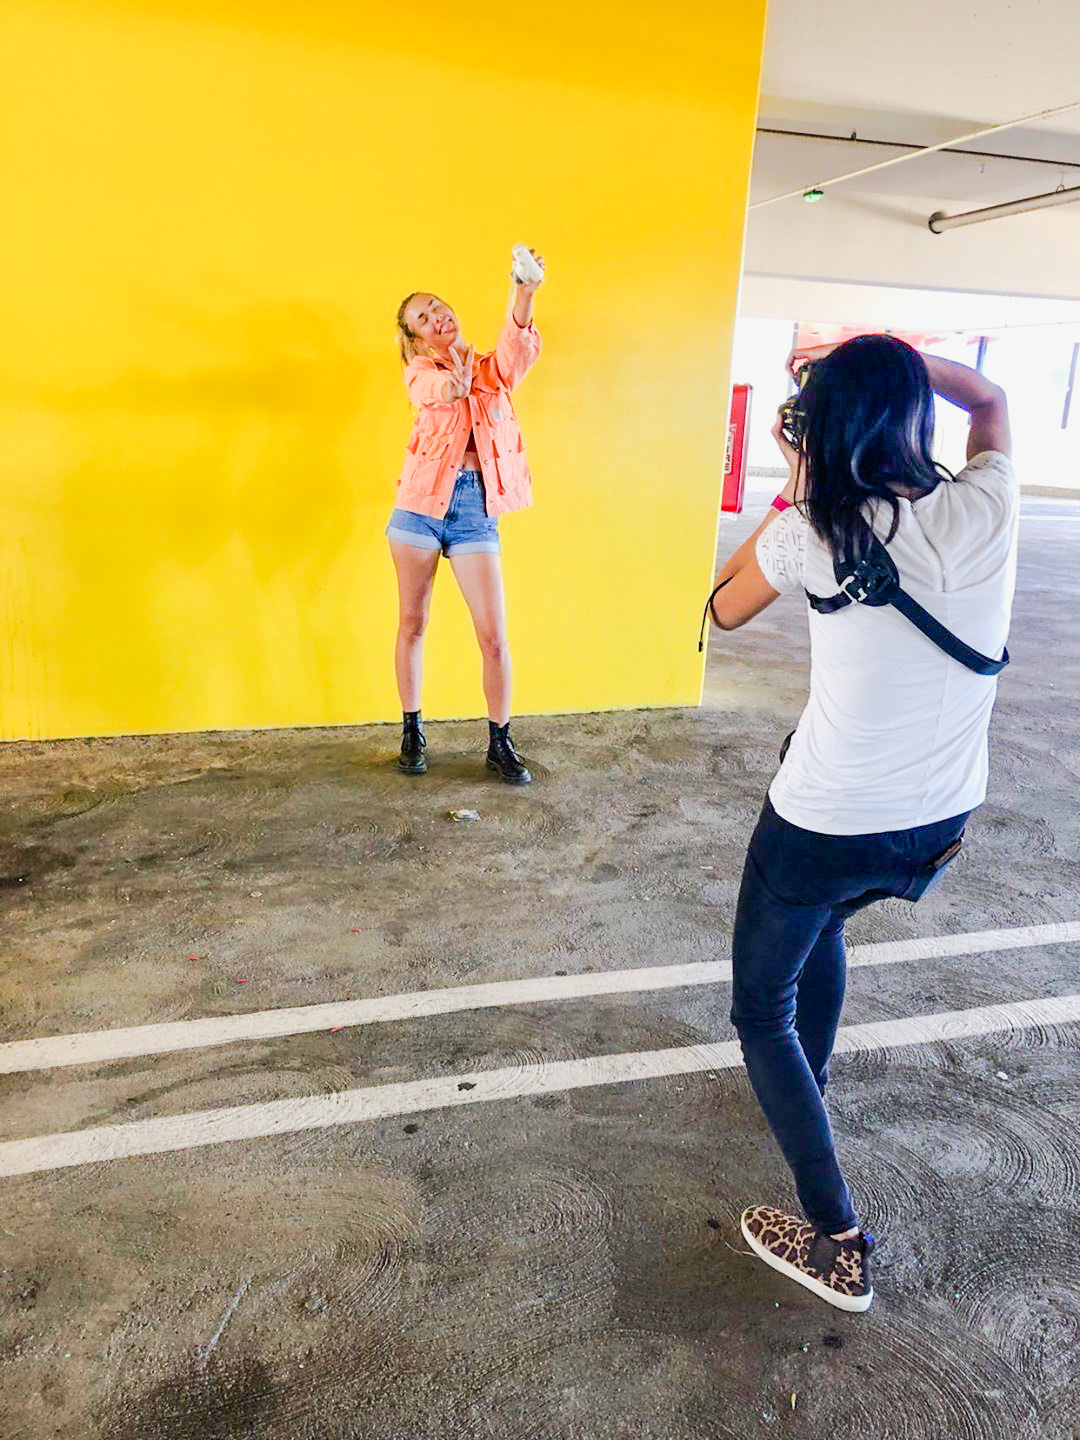 A photographer taking a picture of its  subject. The subject is a woman against the wall wearing orange jacket, a crop top and shorts.